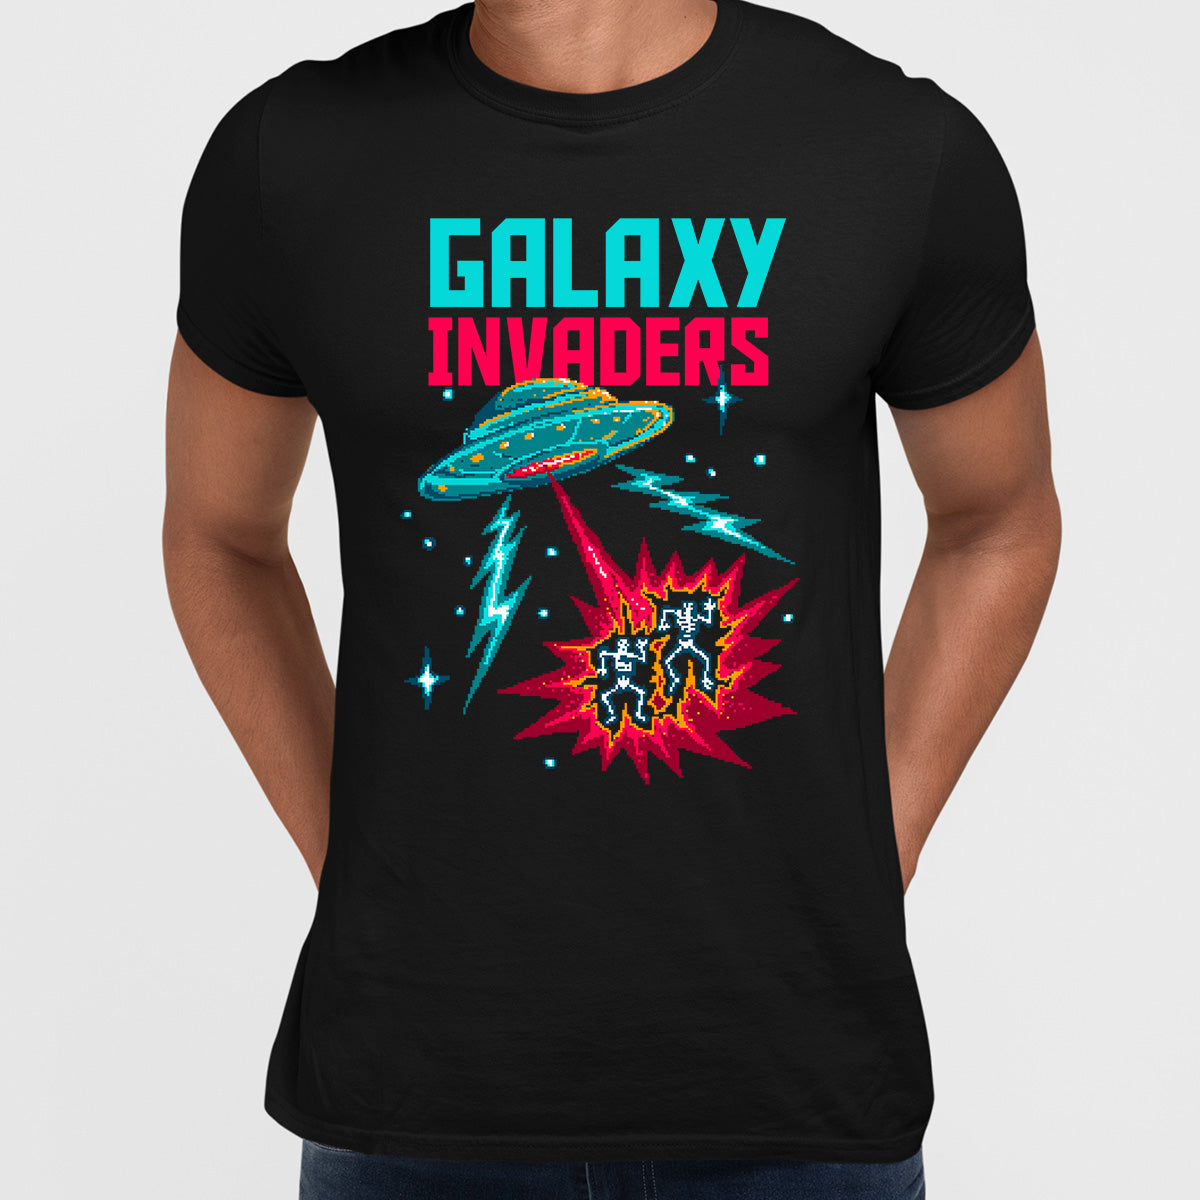 Retro Tee Galaxy Invaders Pixel Art T-Shirt for Geeks and Retro fans - Kuzi Tees